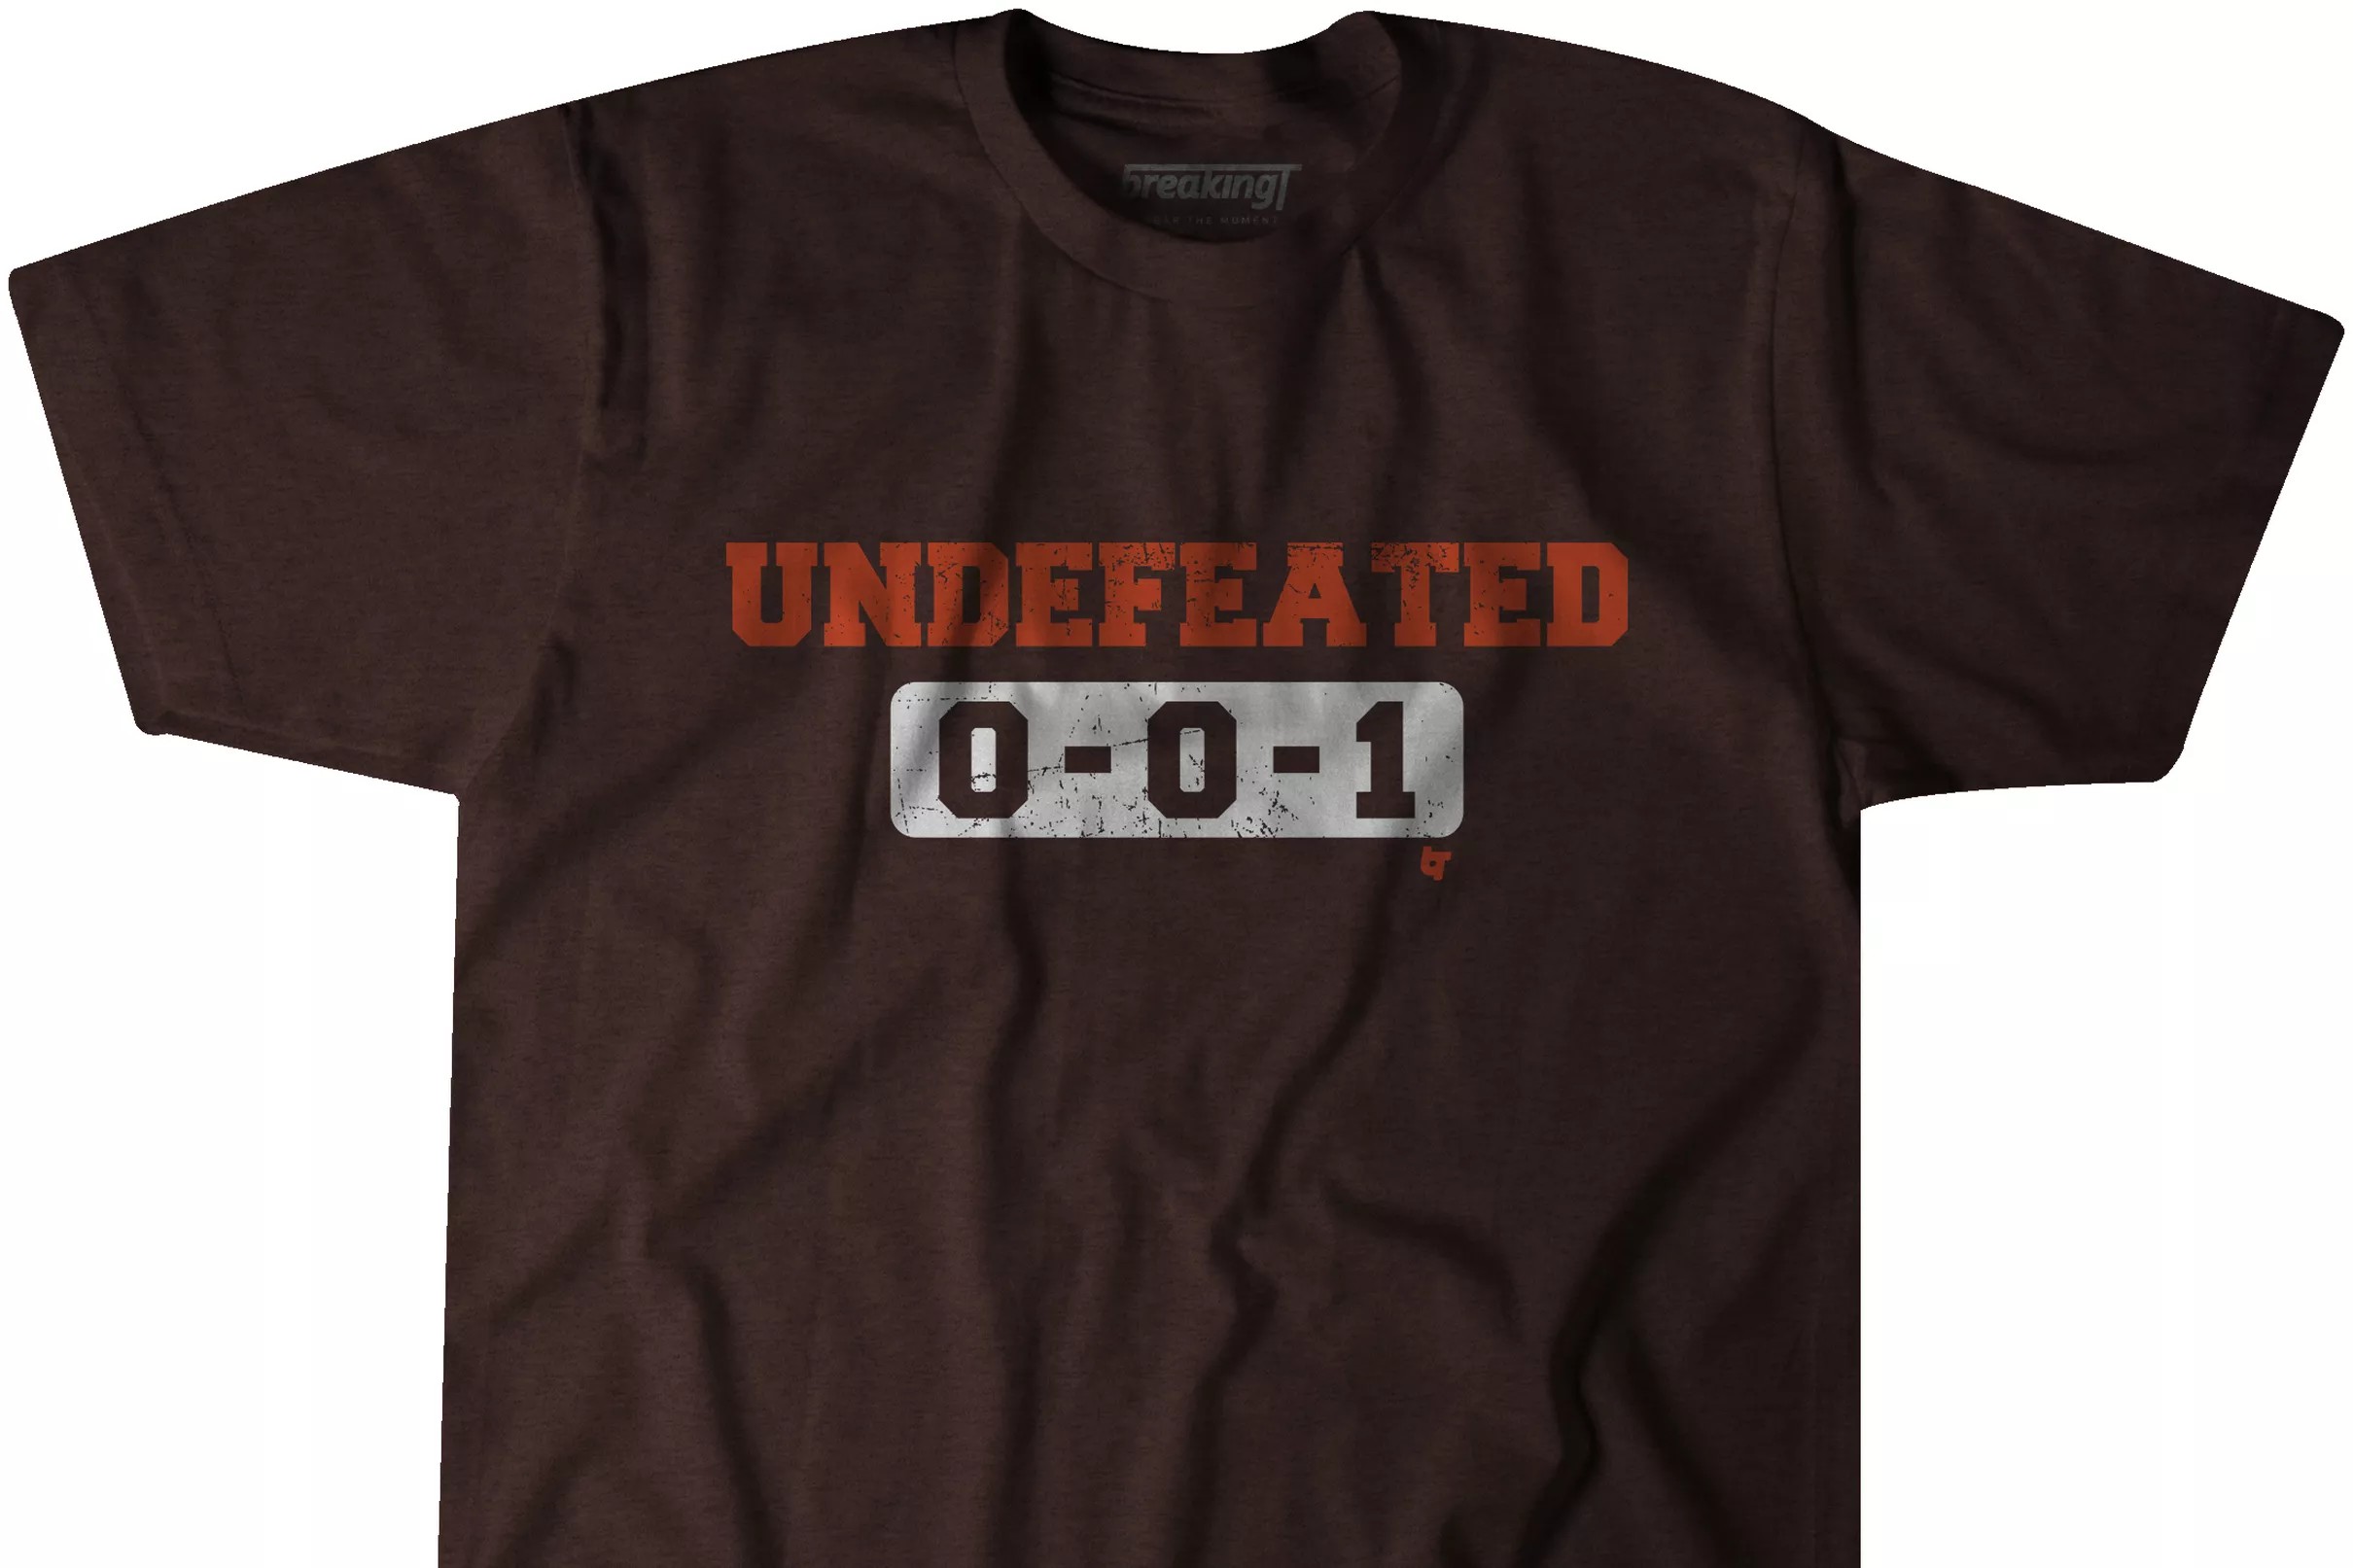 Cleveland Browns t-shirt highlighting the rarity of 0-0-1 is now available